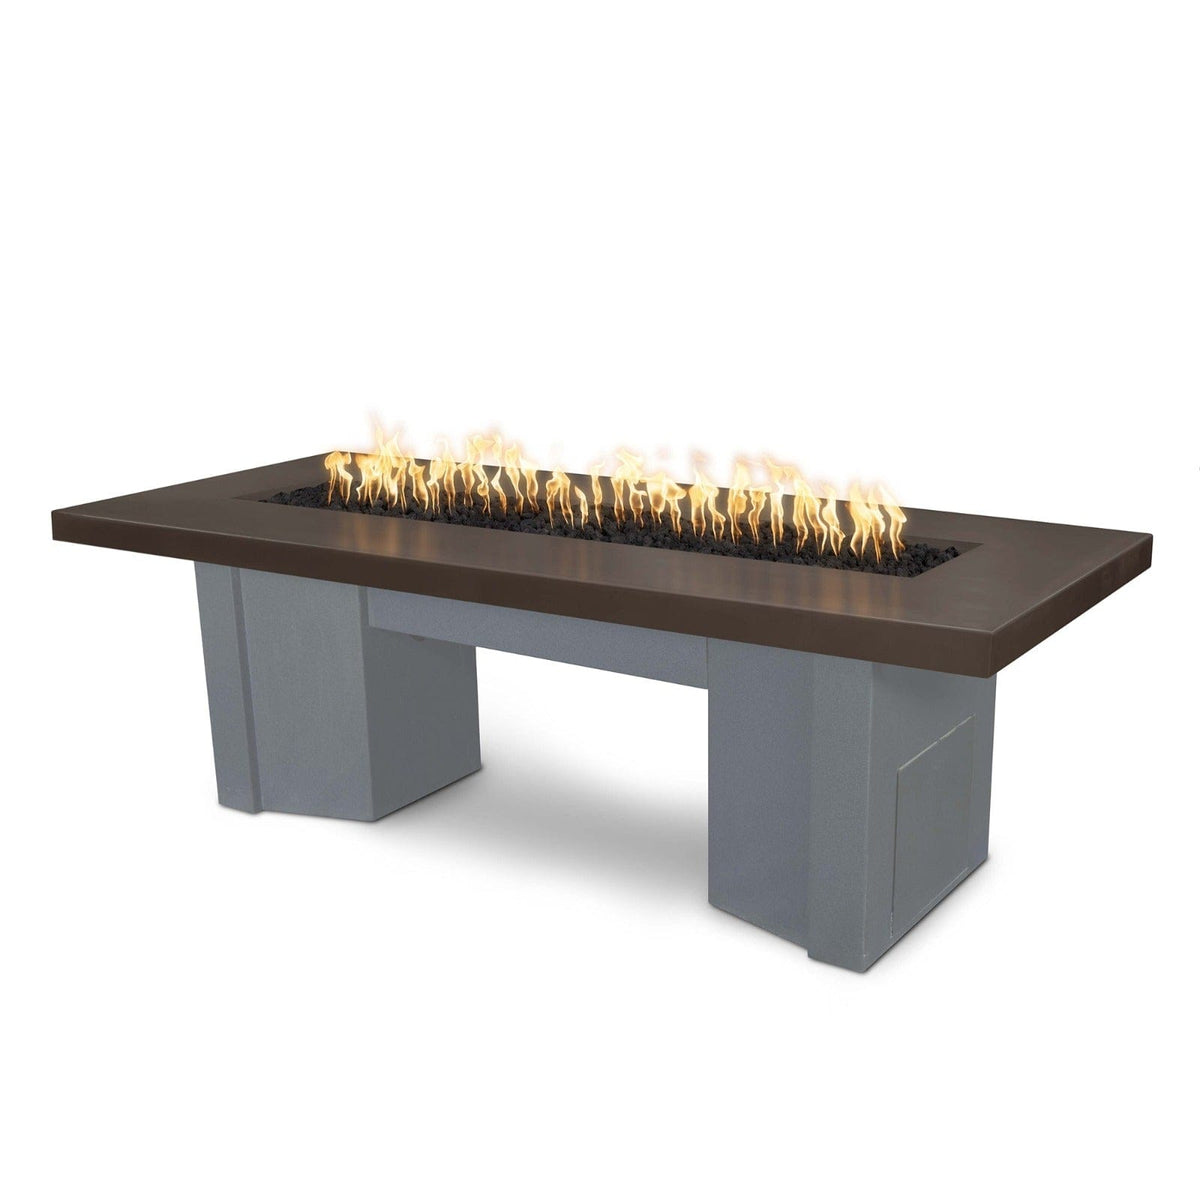 The Outdoor Plus Fire Features Chocolate (-CHC) / Gray Powder Coated Steel (-GRY) The Outdoor Plus 60&quot; Alameda Fire Table Smooth Concrete in Liquid Propane - Match Lit with Flame Sense System / OPT-ALMGFRC60FSML-LP